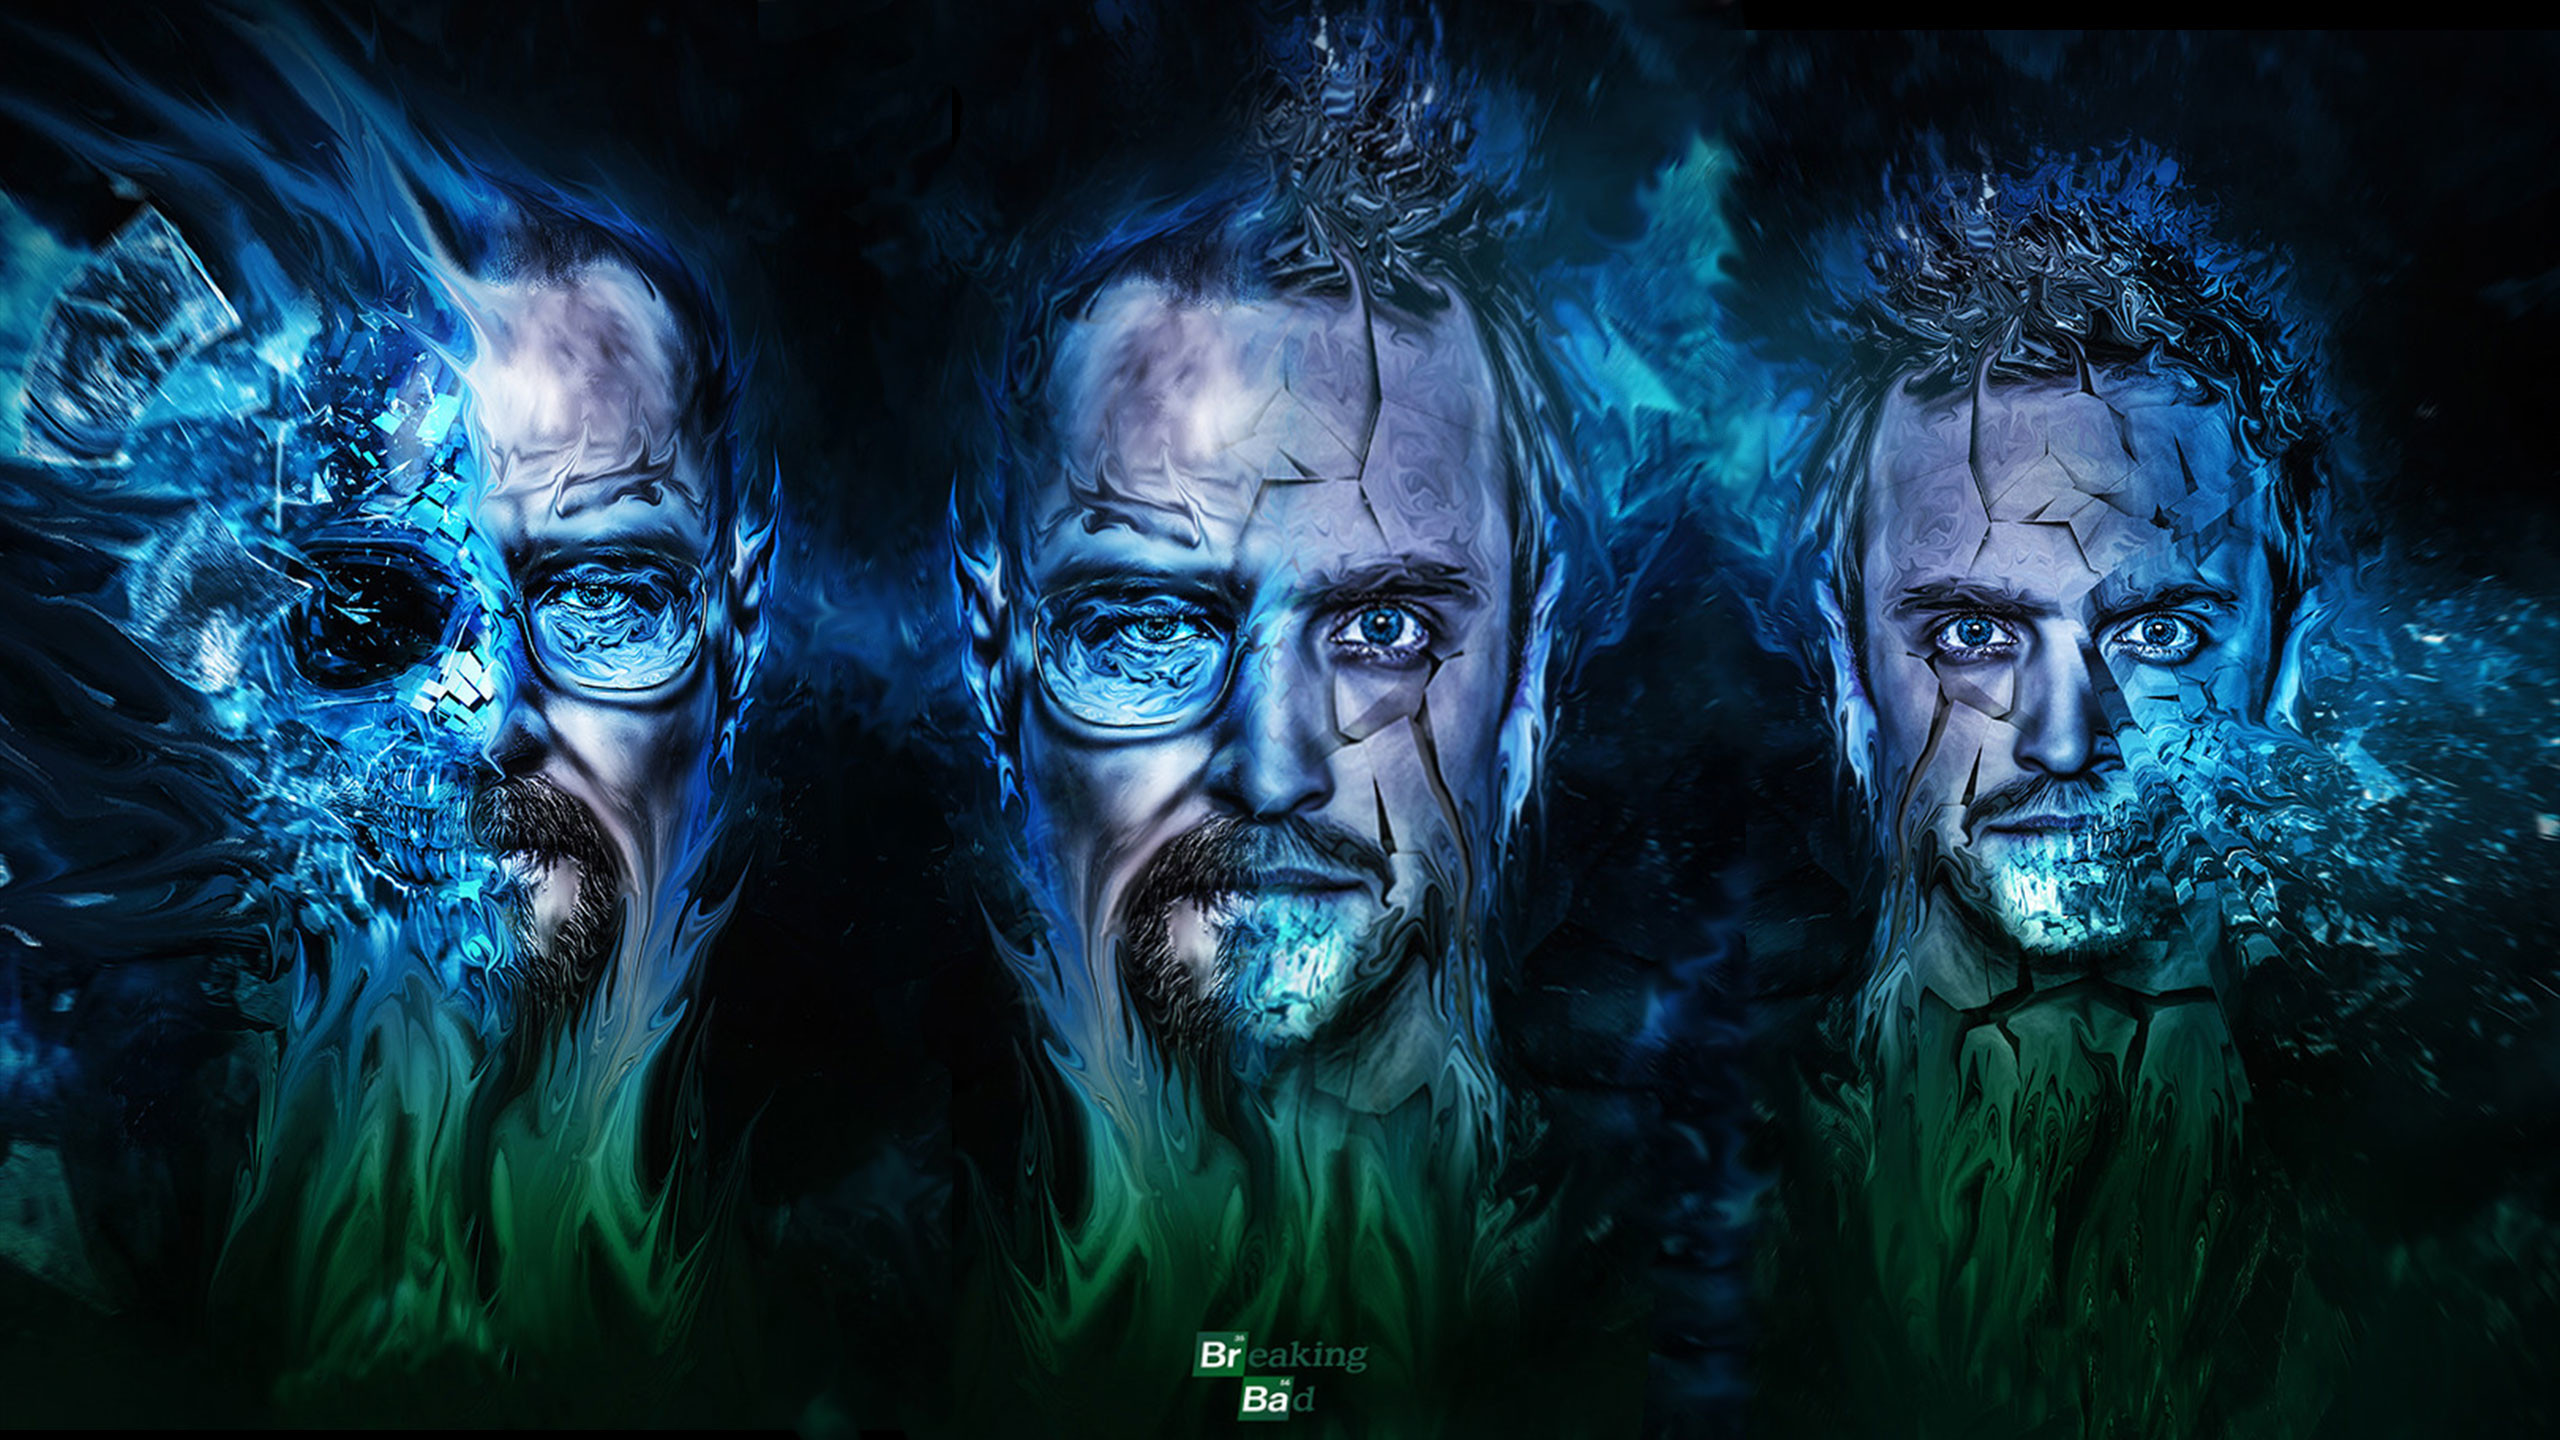 2560x1440 My all time favorite breaking bad wallpaper. [ .